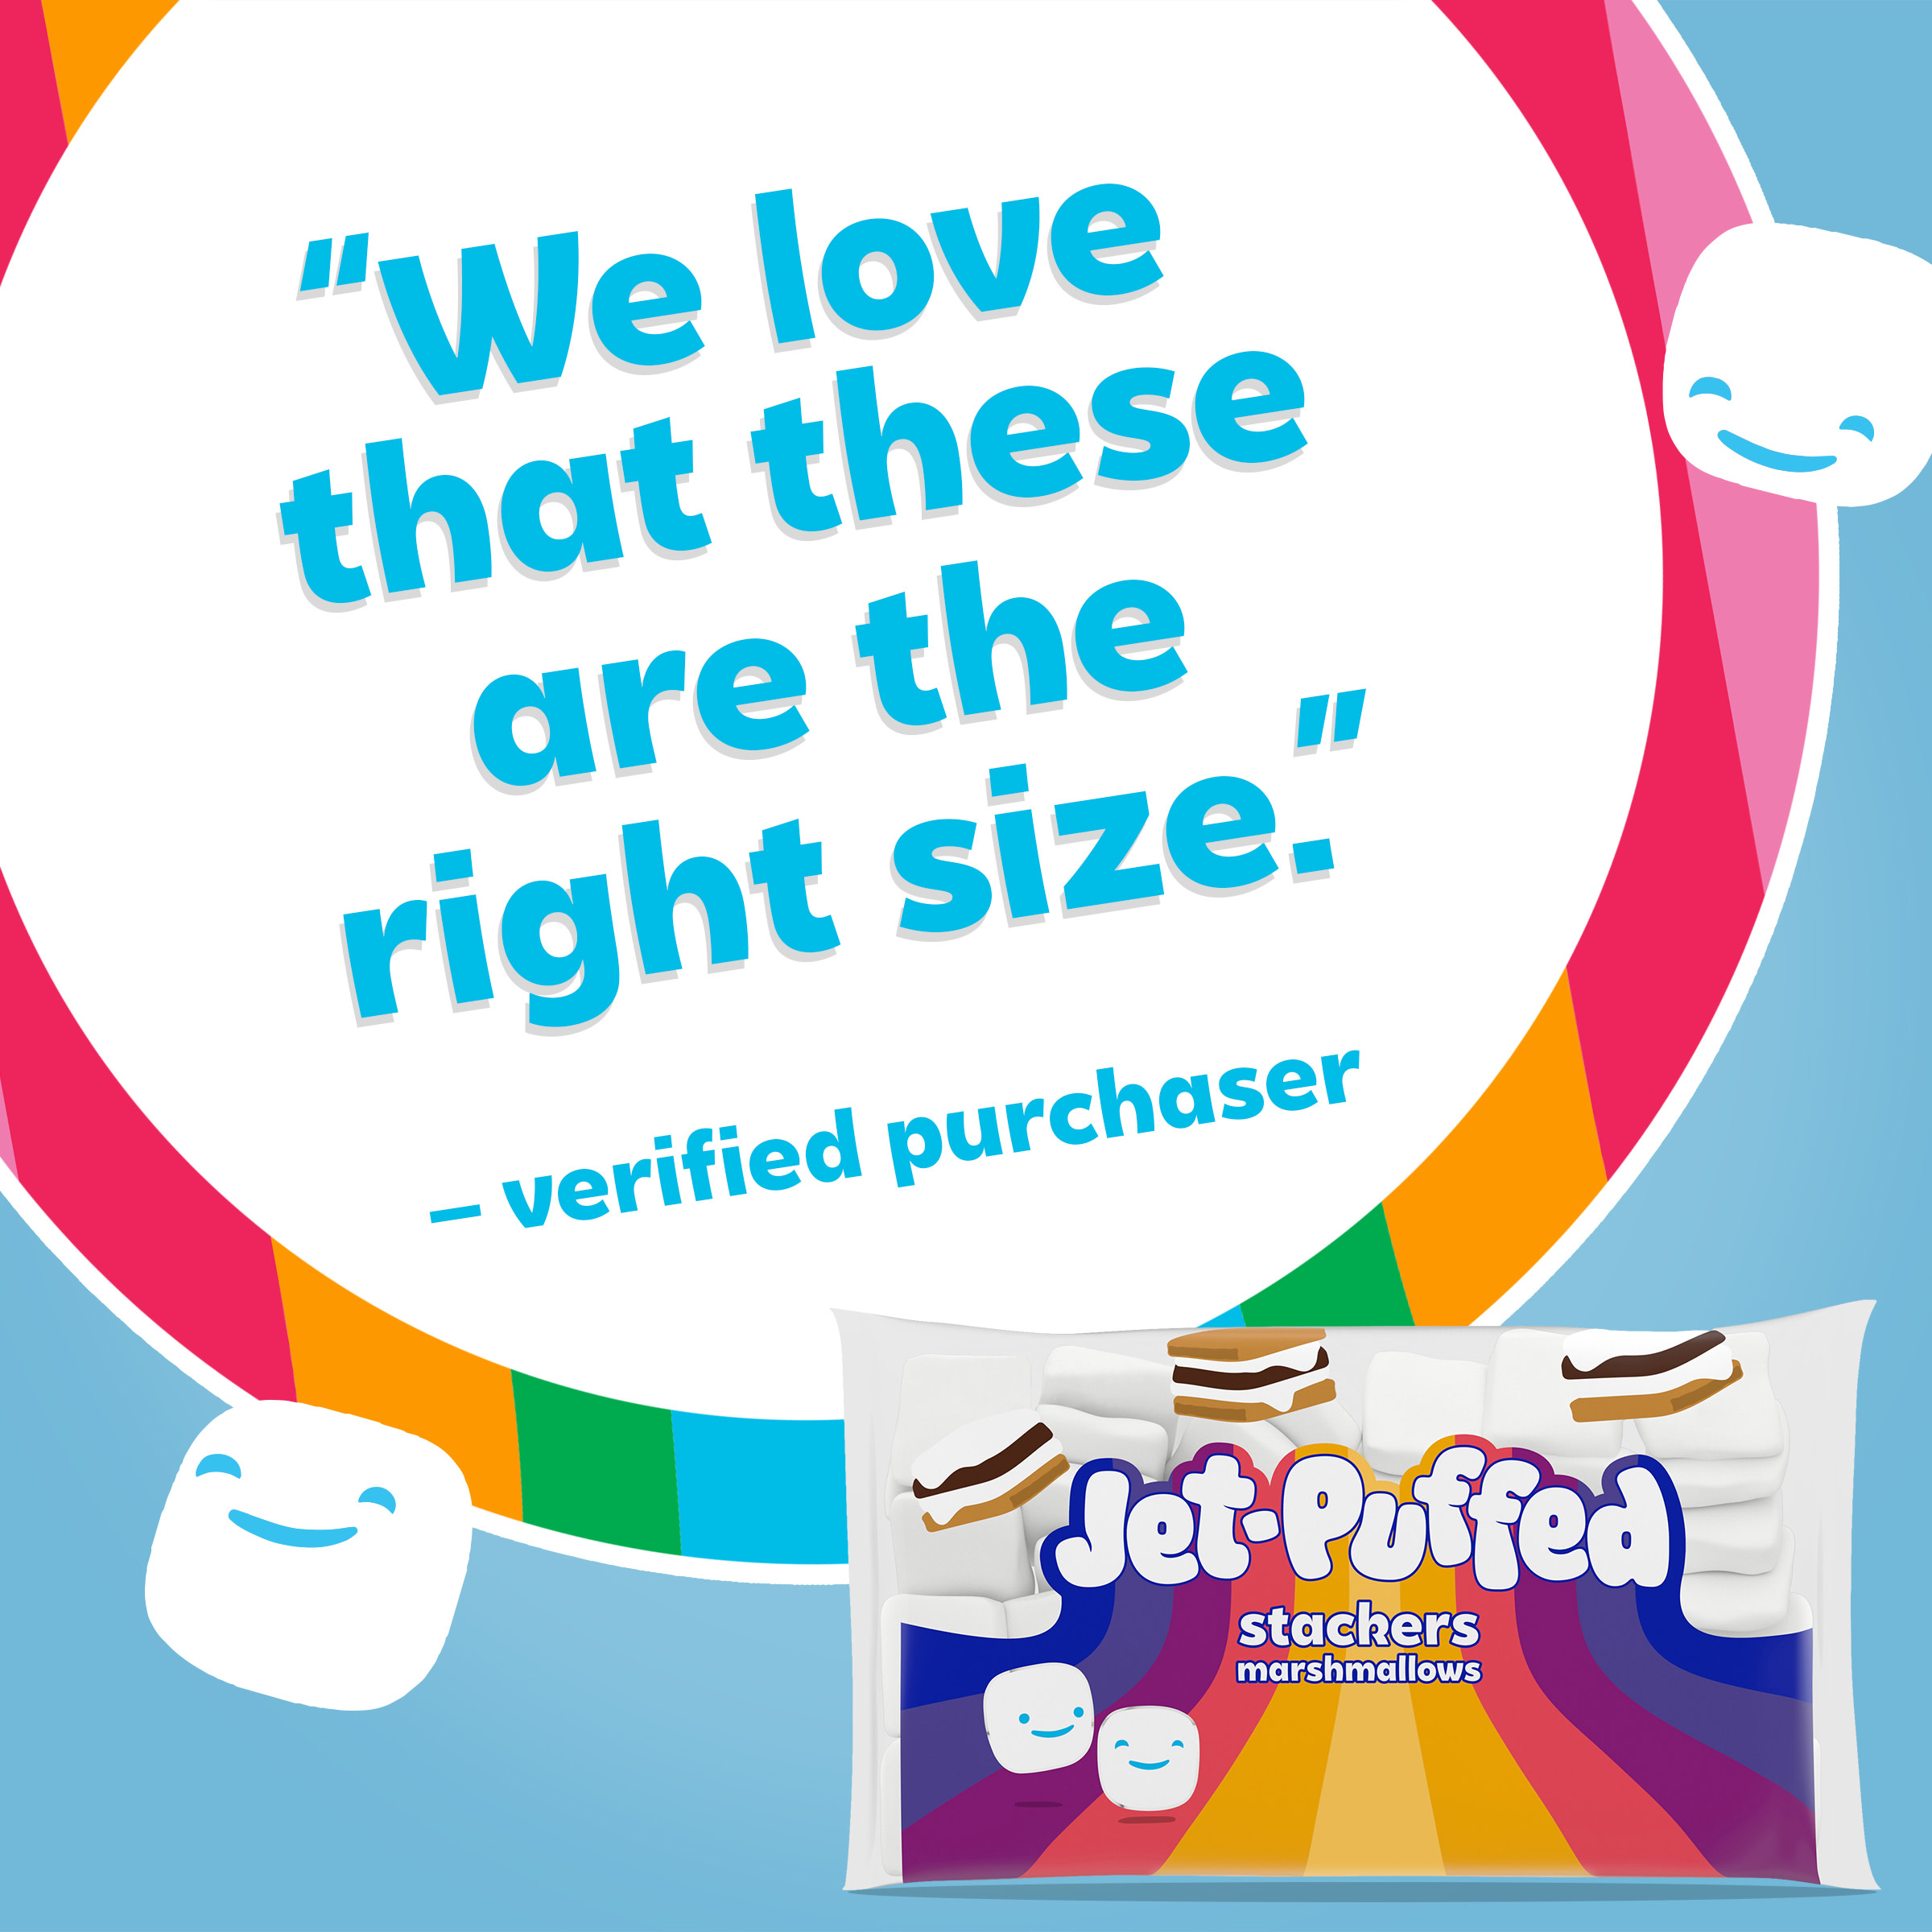 Jet-Puffed Stackers Marshmallows, 8 oz. Bag - image 9 of 16